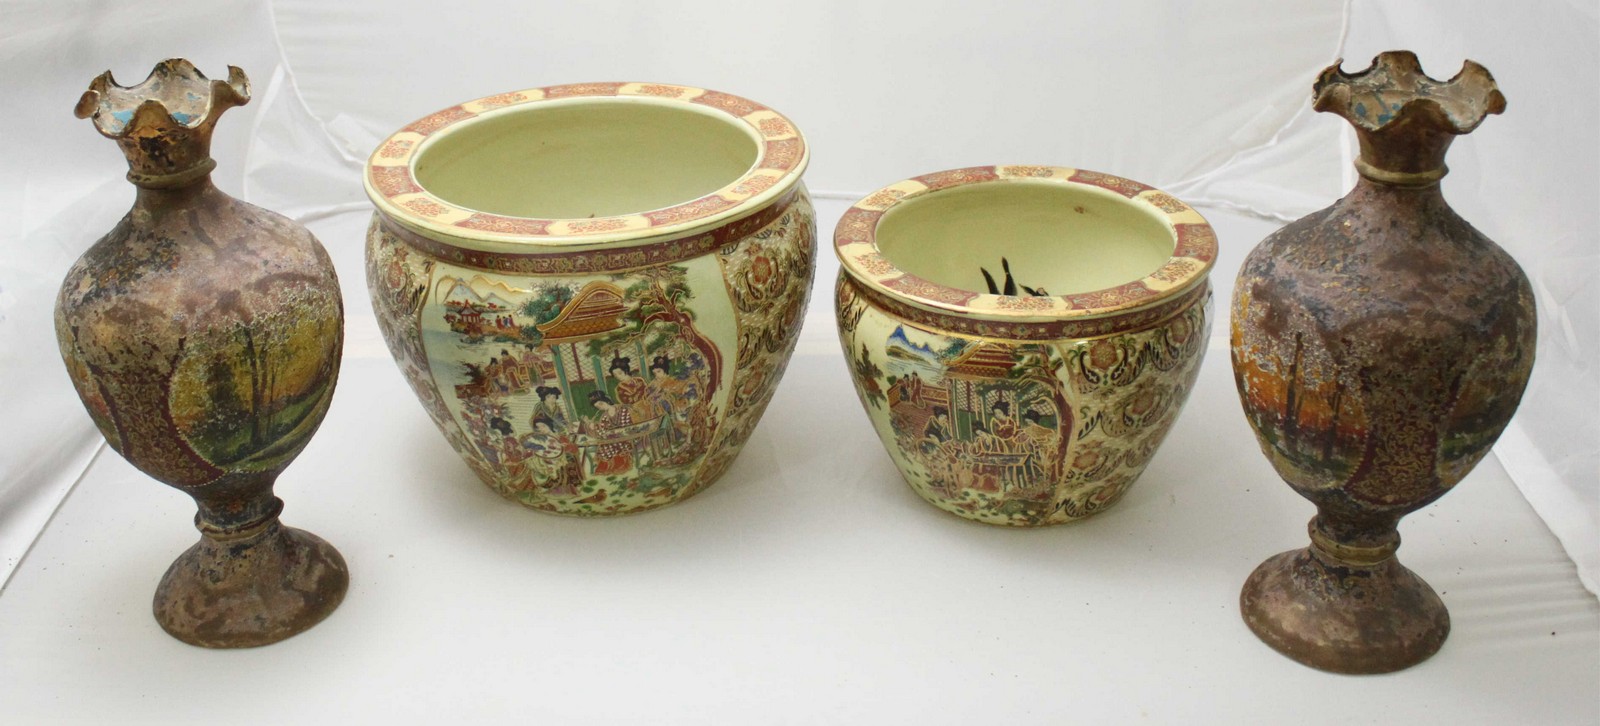 A pair of unusual vases made from vellum or hide, with crimped rims and the sides decorated with